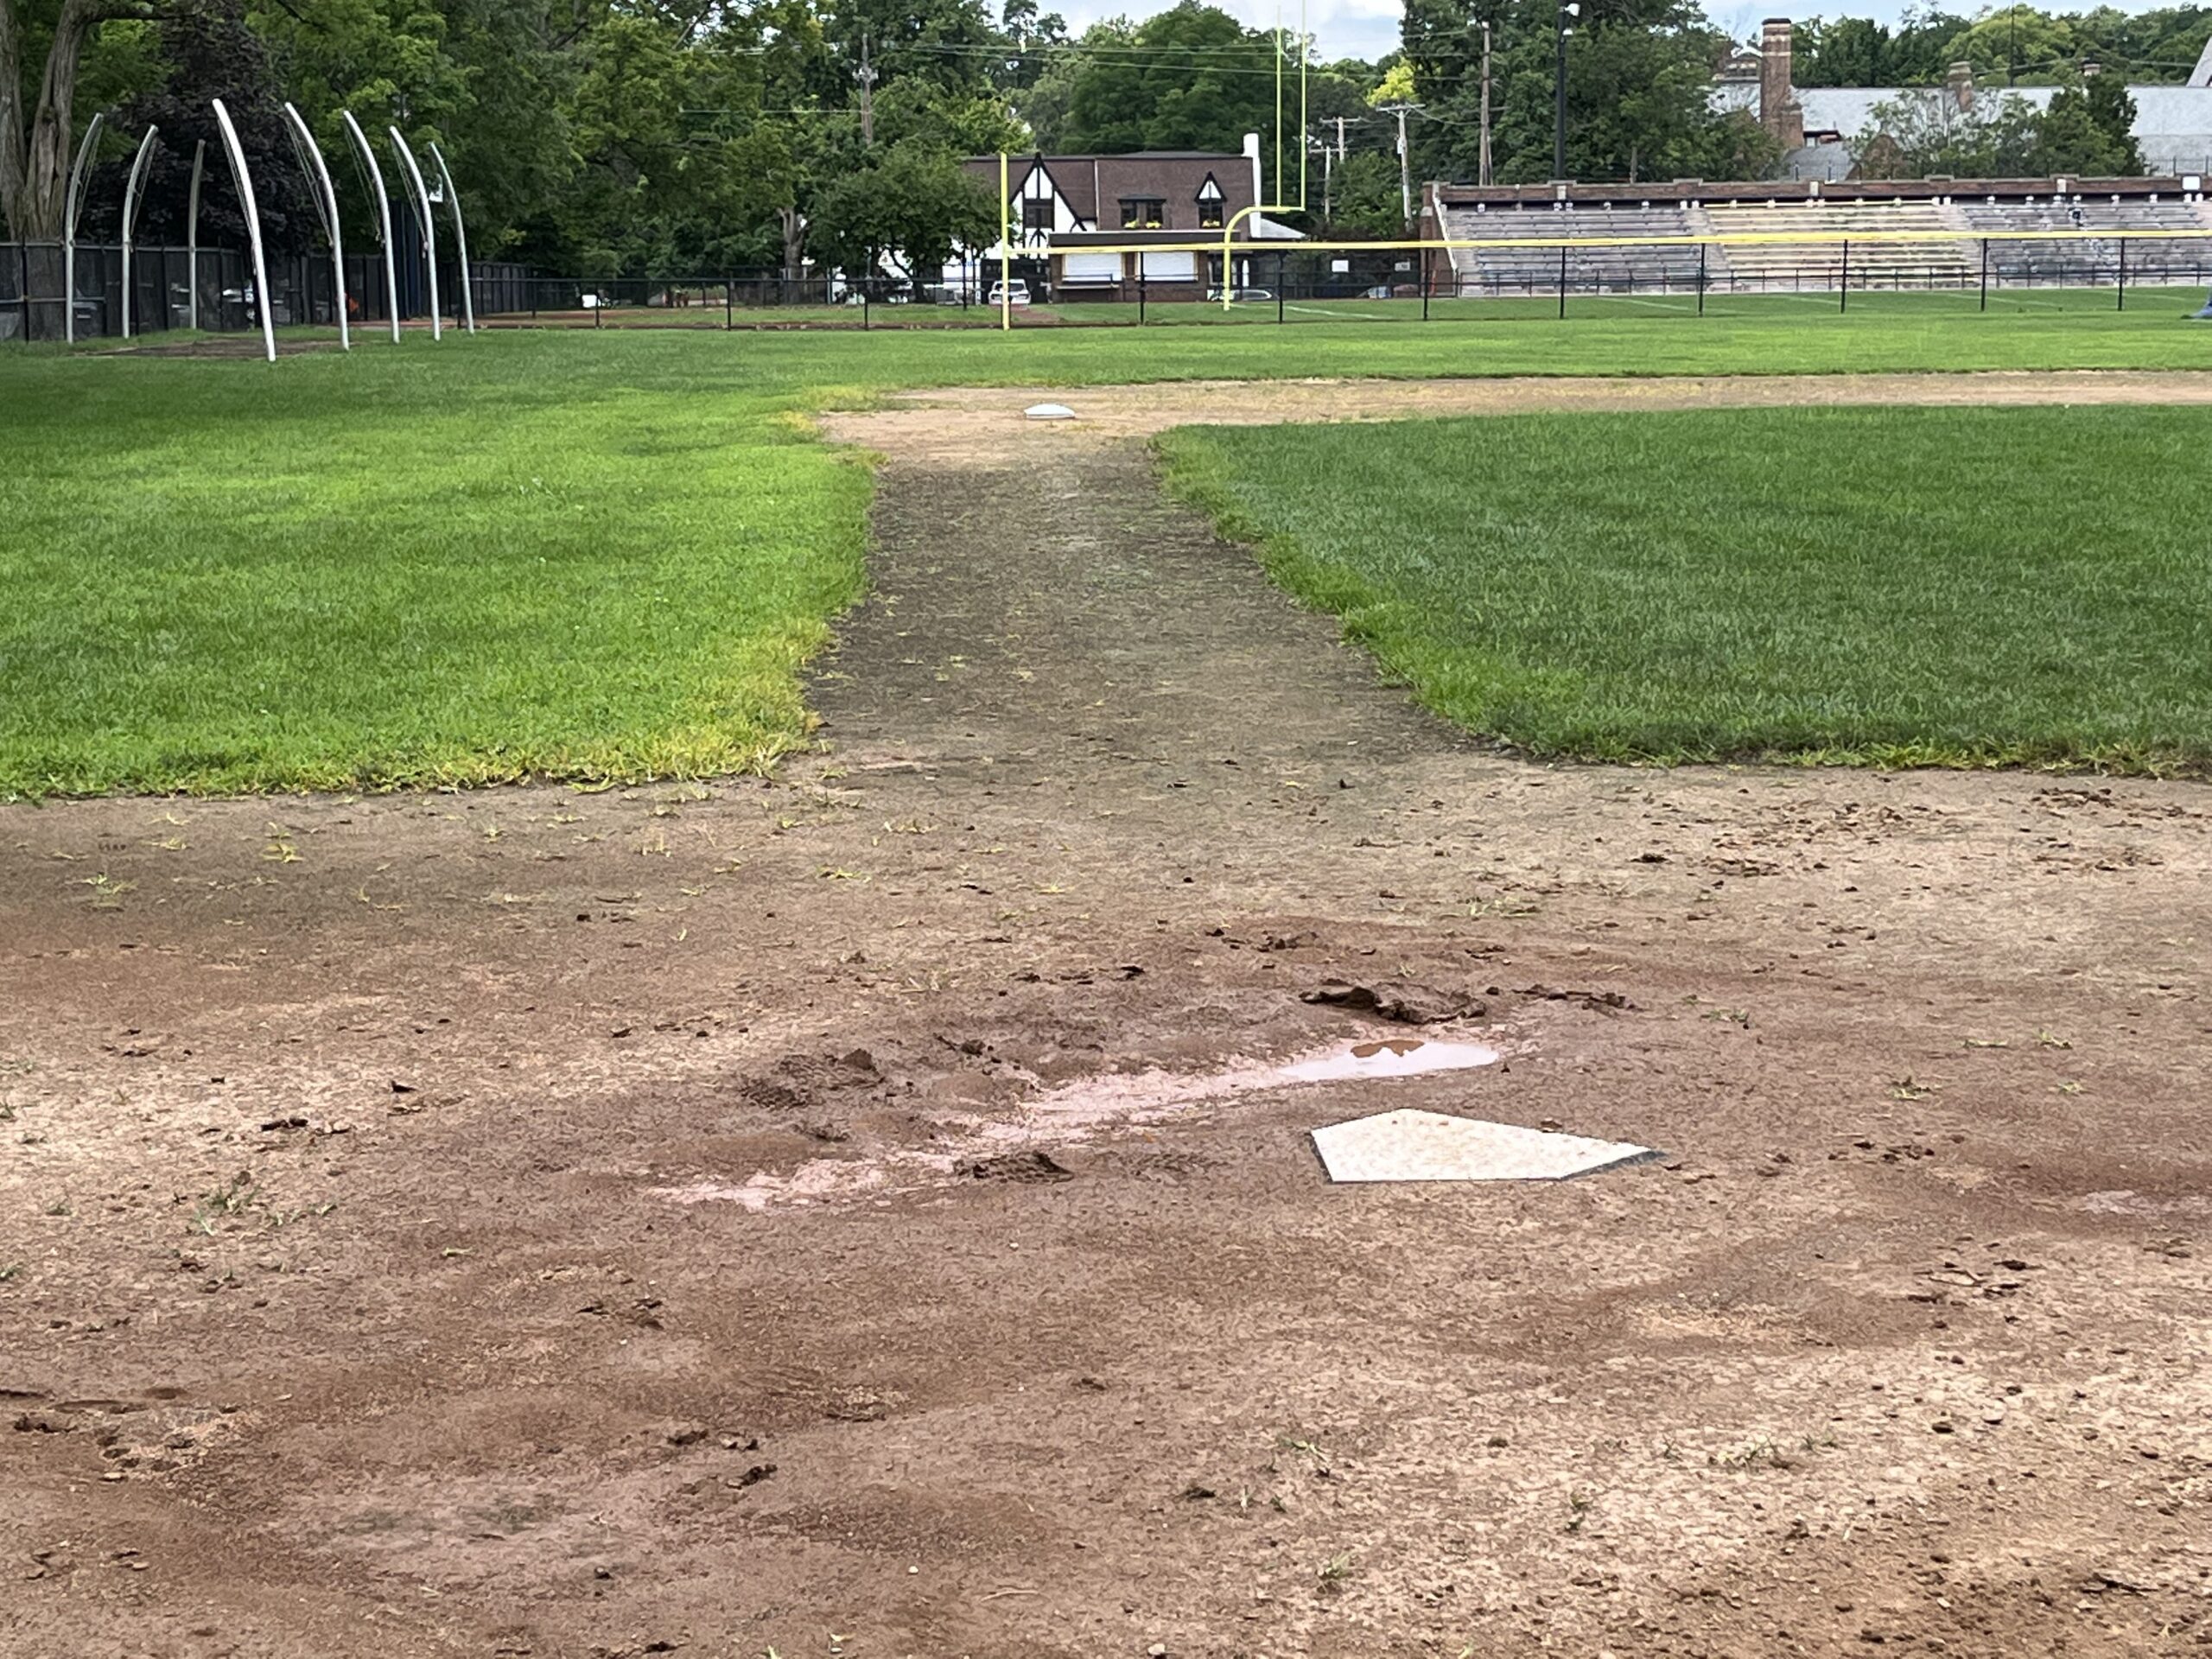 Home plate at OHS baseball field